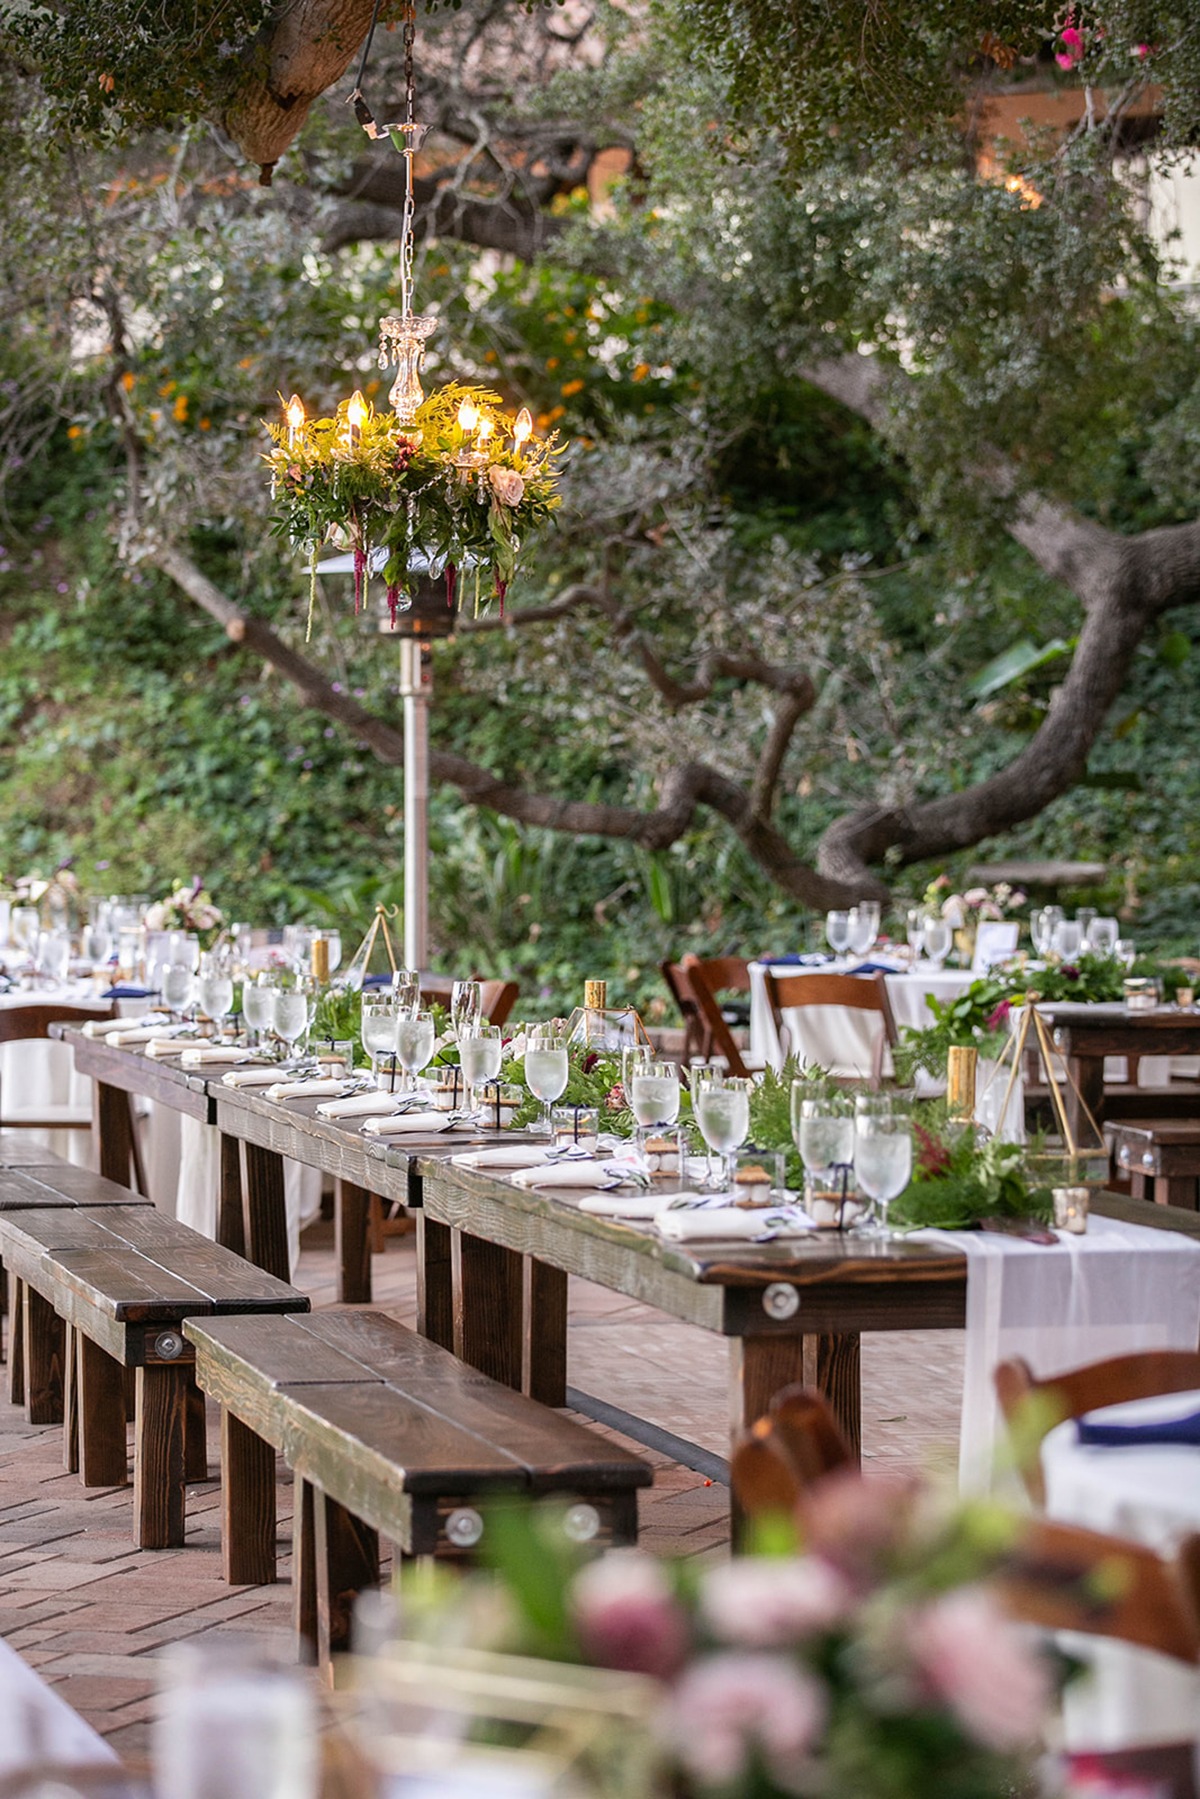 family style seating and outdoor chandeliers.